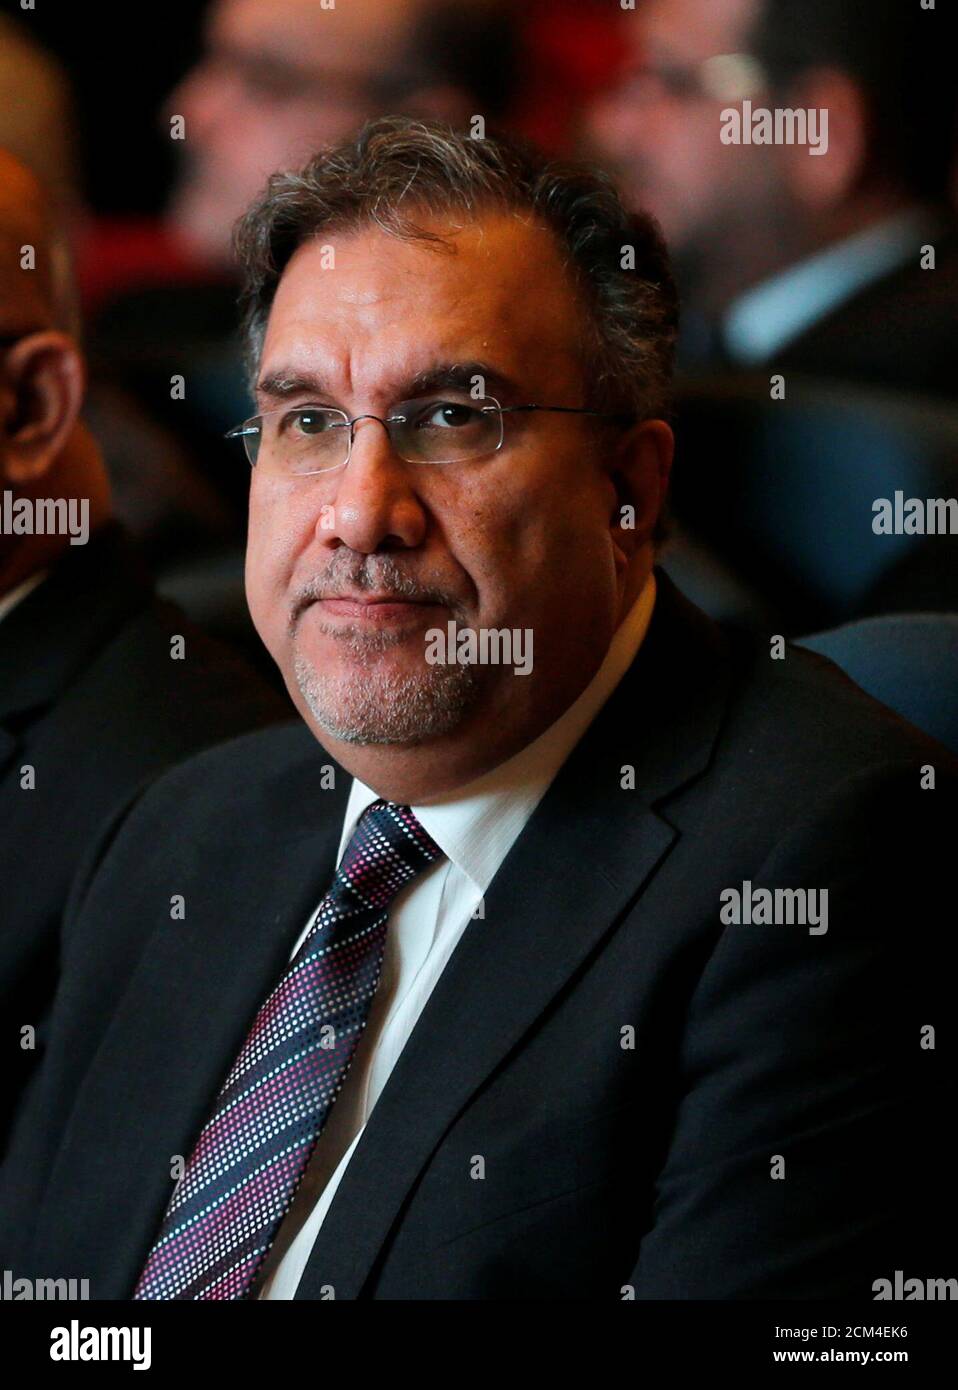 Iraq's Minister of Electricity Luay Al Khateeb attends the opening of  Baghdad International Fair, Iraq November 10, 2018. REUTERS/Thaier  al-Sudani Stock Photo - Alamy